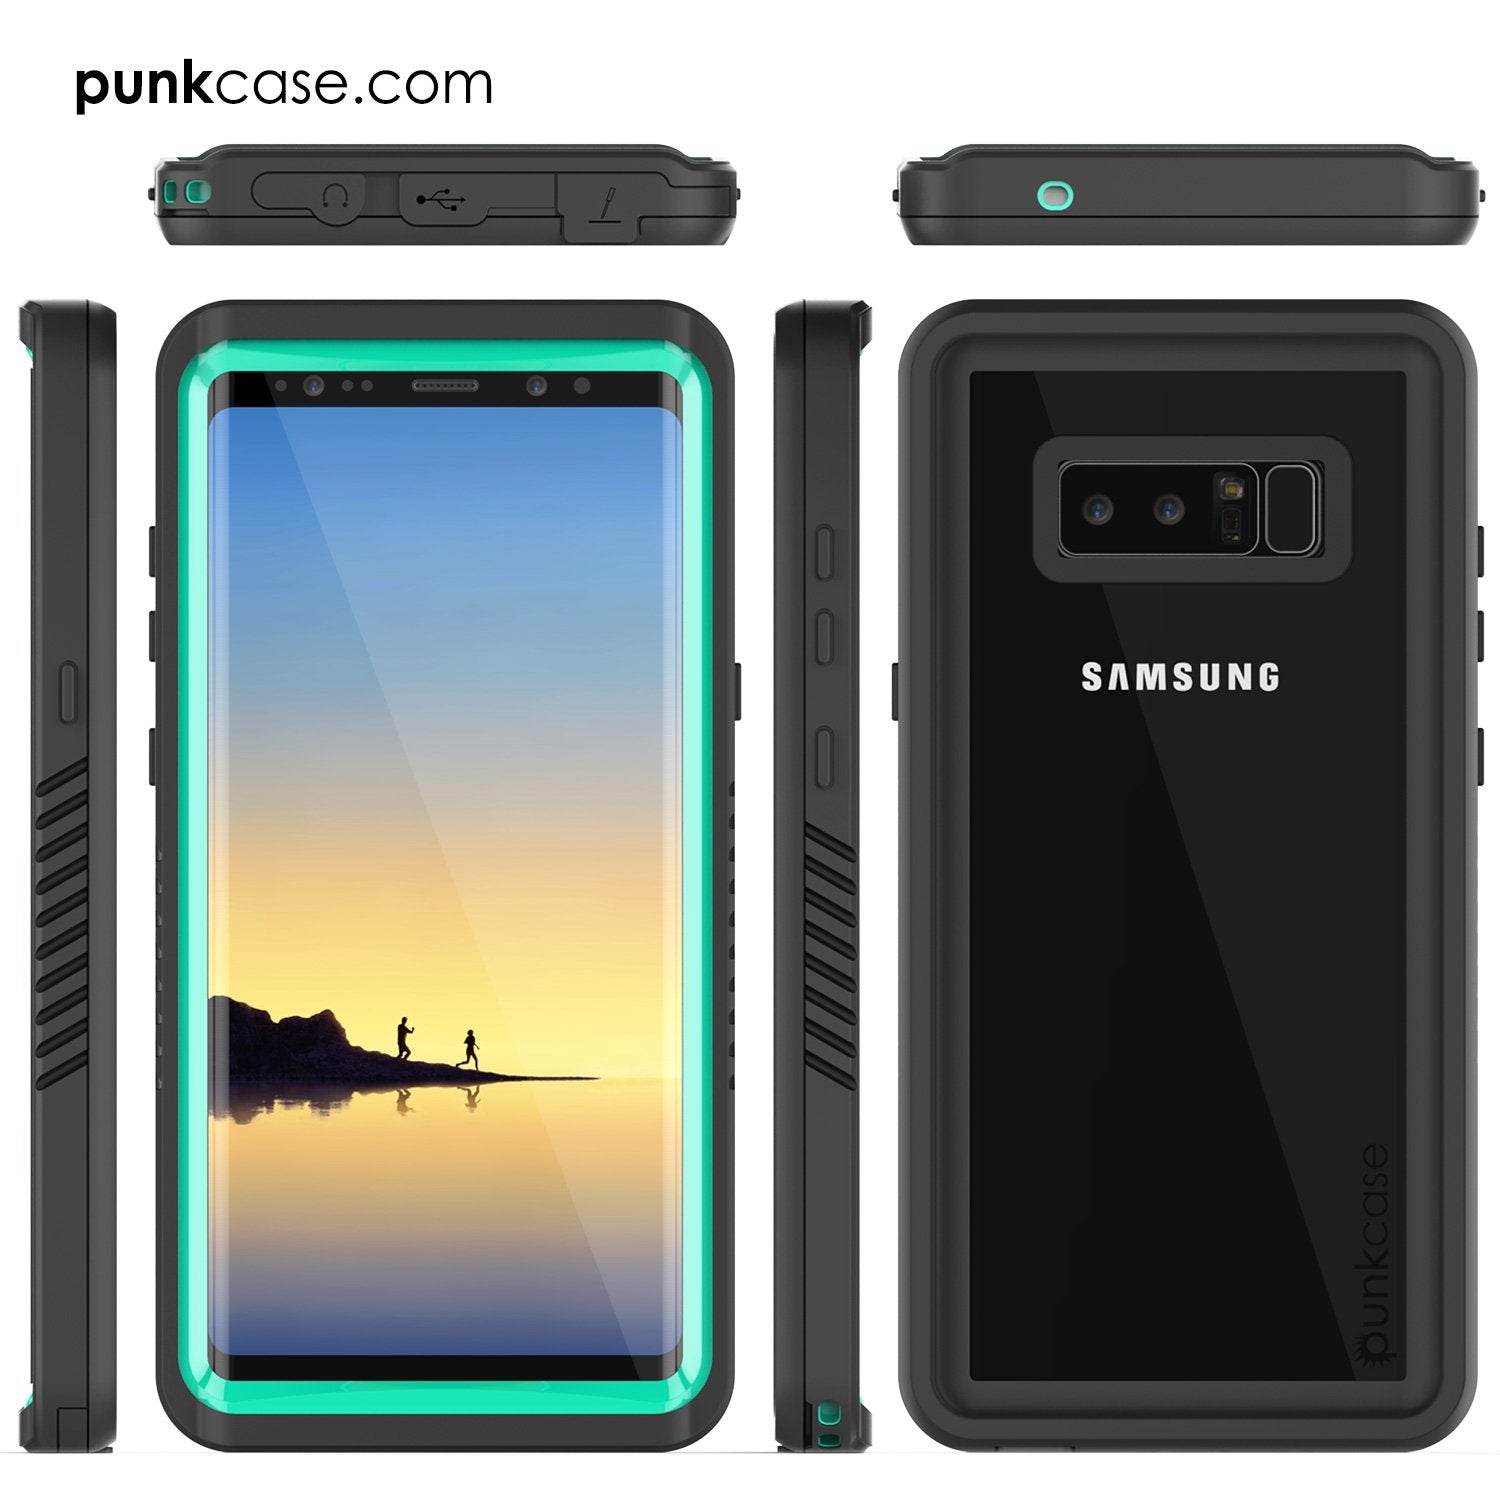 Galaxy Note 8 Case, Punkcase [Extreme Series] [Slim Fit] [IP68 Certified] [Shockproof] Armor Cover W/ Built In Screen Protector [Teal]